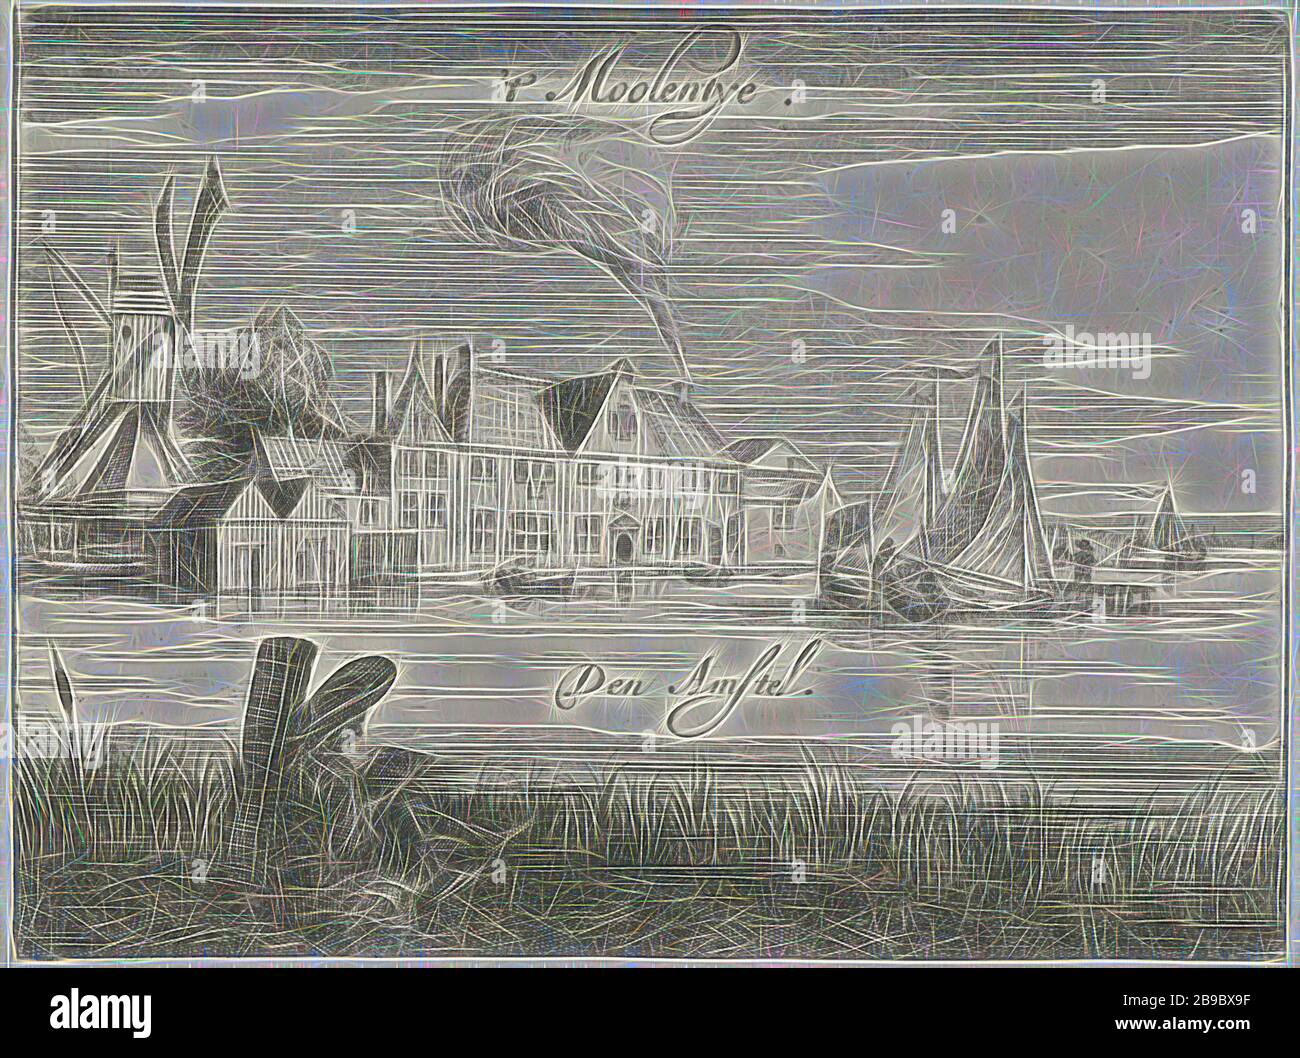 Herberg het Molentje on the Amstel 't Moolentye (title on object) Castles and inns on the Vecht and Amstel (series title), View of the Molentje aan de Amstel inn. In the foreground a figure is drawing on the bank. The print is part of a six-part series with shows of castles and inns located on the Vecht and Amstel, hotel, hostelry, inn, river, Herberg het Moolentje, Amstel, Johannes Leupenius, Amsterdam, 1666 - 1693, paper, etching, h 151 mm × w 203 mm, Reimagined by Gibon, design of warm cheerful glowing of brightness and light rays radiance. Classic art reinvented with a modern twist. Photog Stock Photo